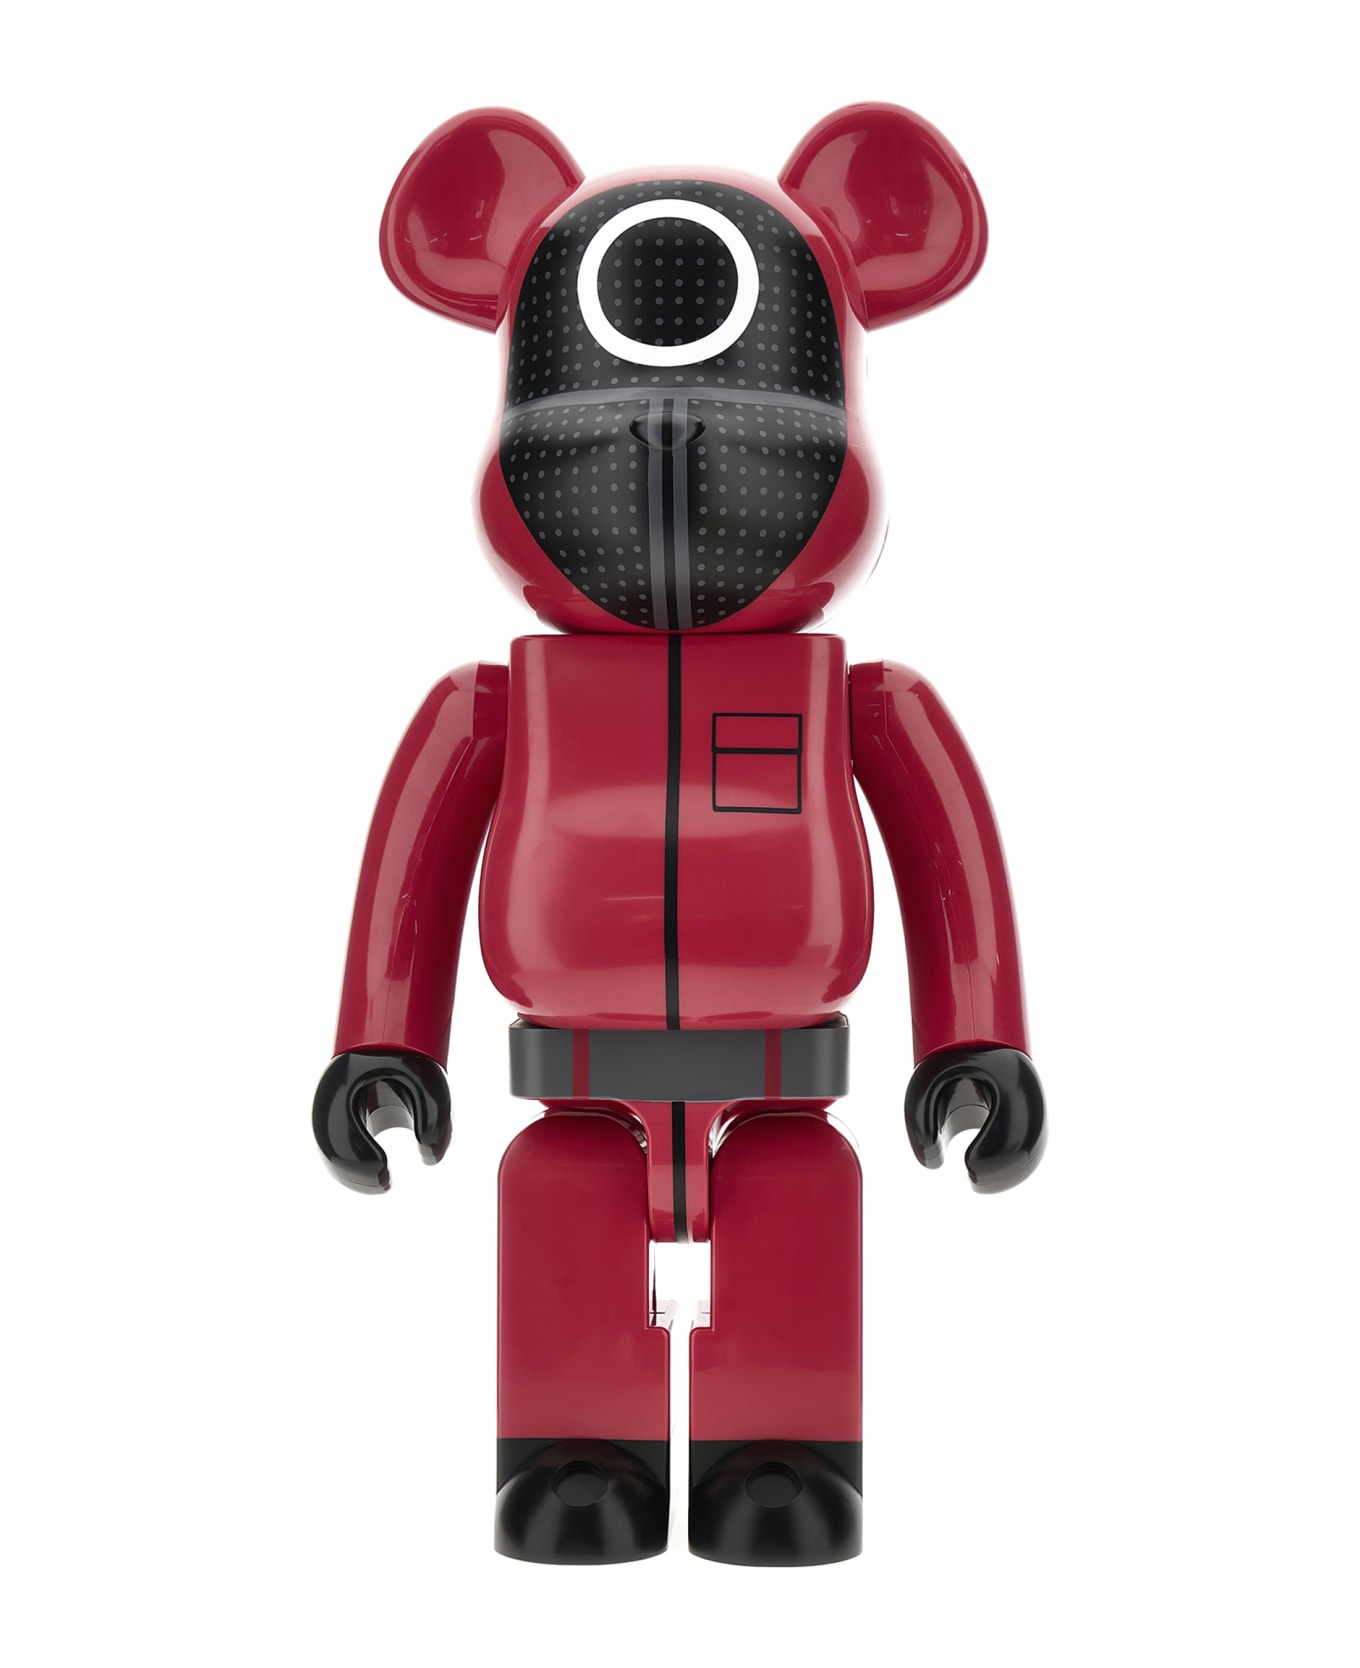 Medicom Toy Be@rbrick 1000% Squid Game Worker - Red